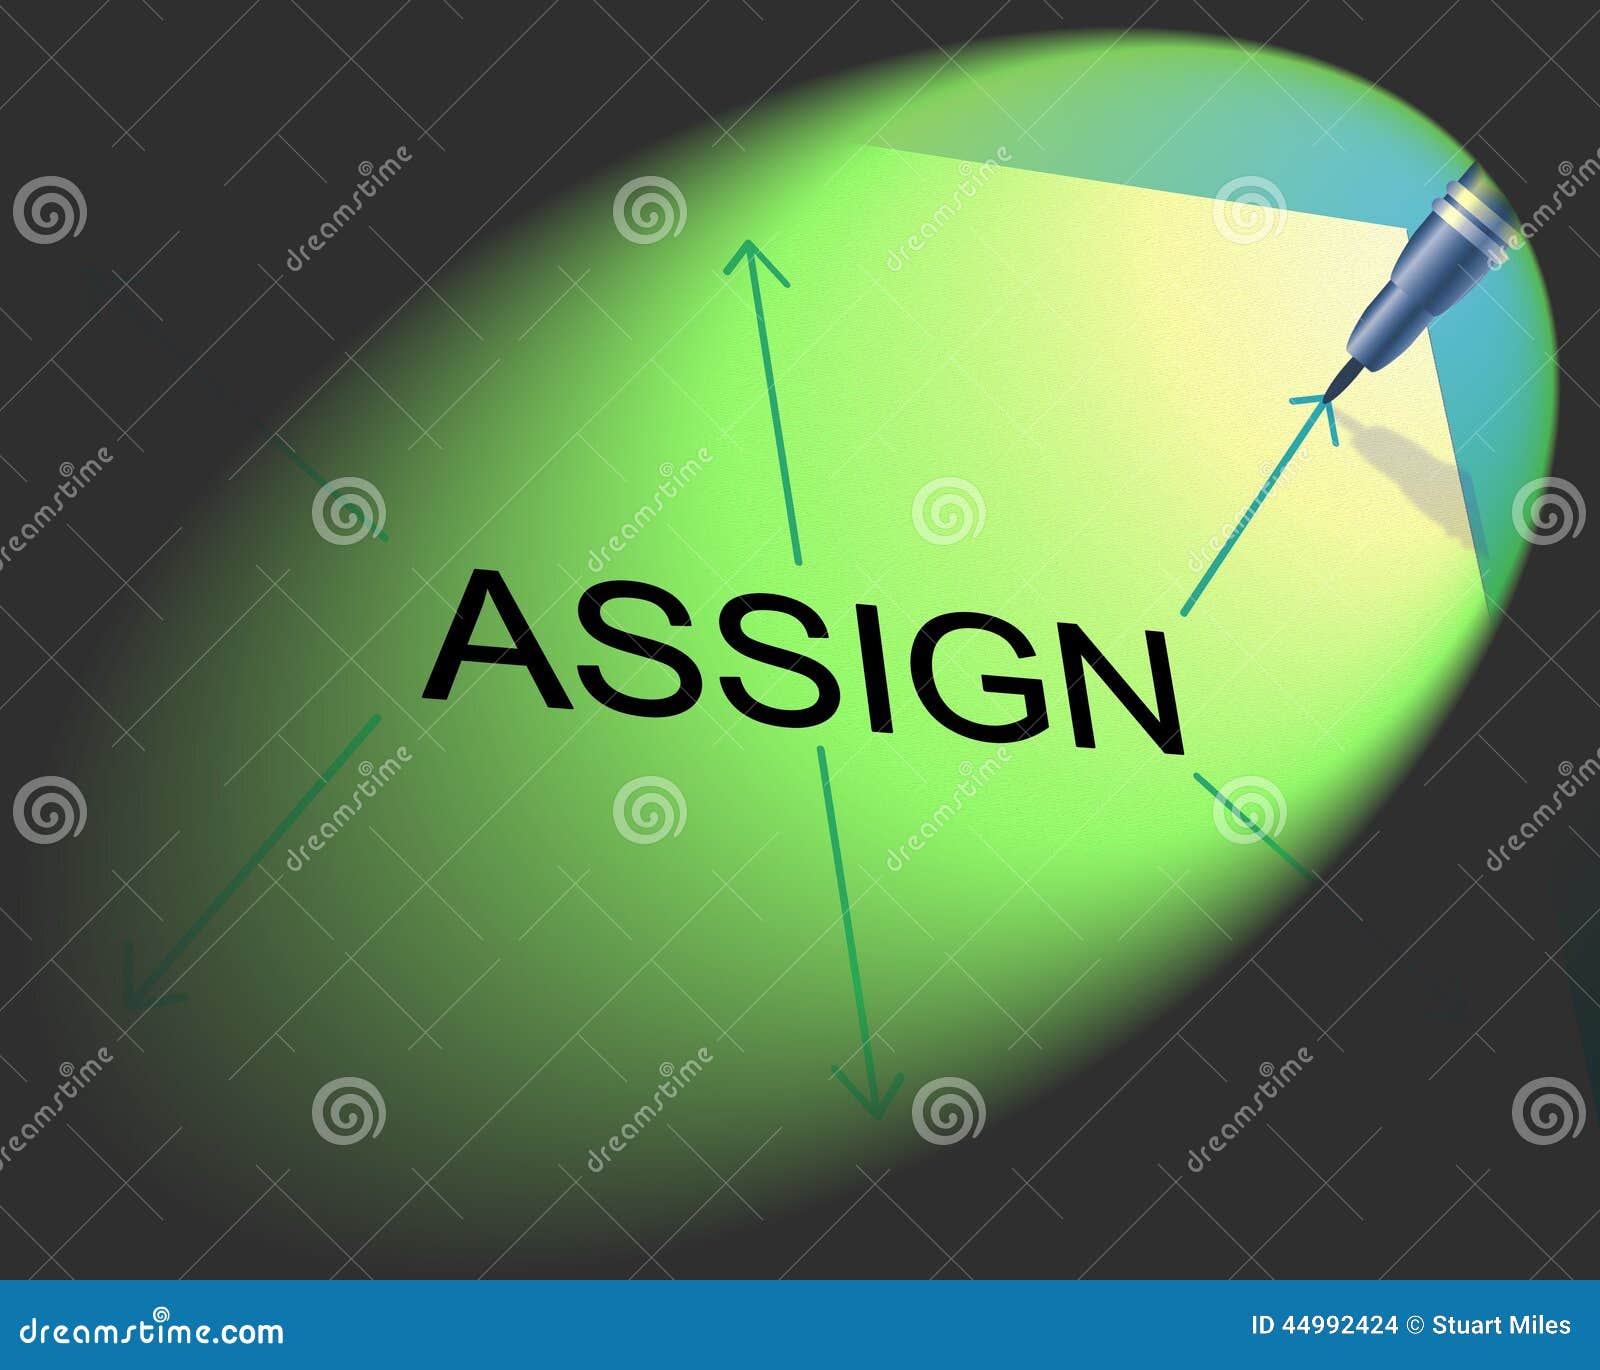 assign vs appoint